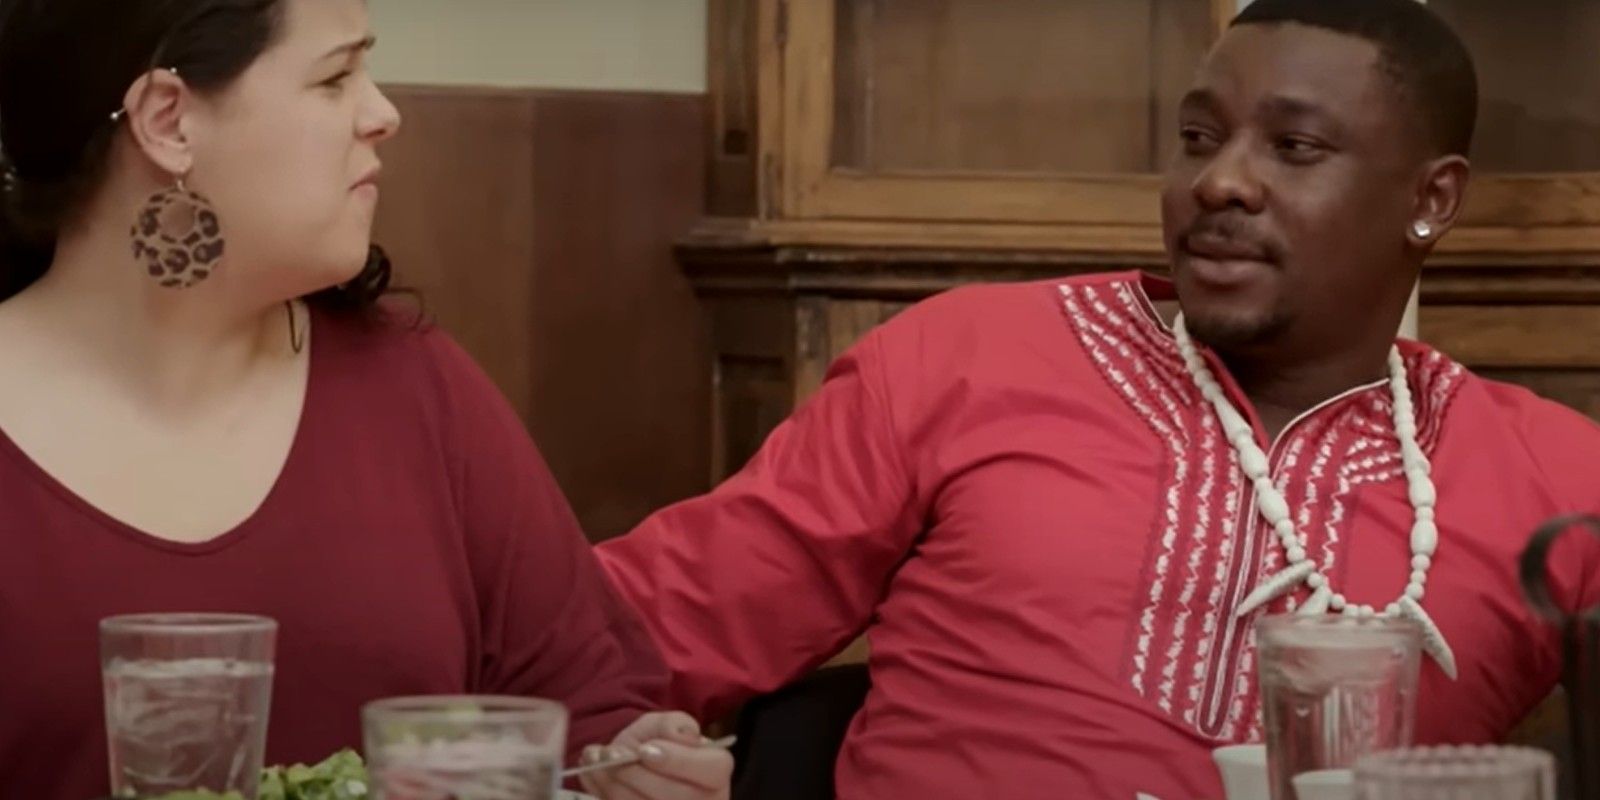 Kobe and Emily from 90 Day Fiancé season 9 at a table with red clothing on